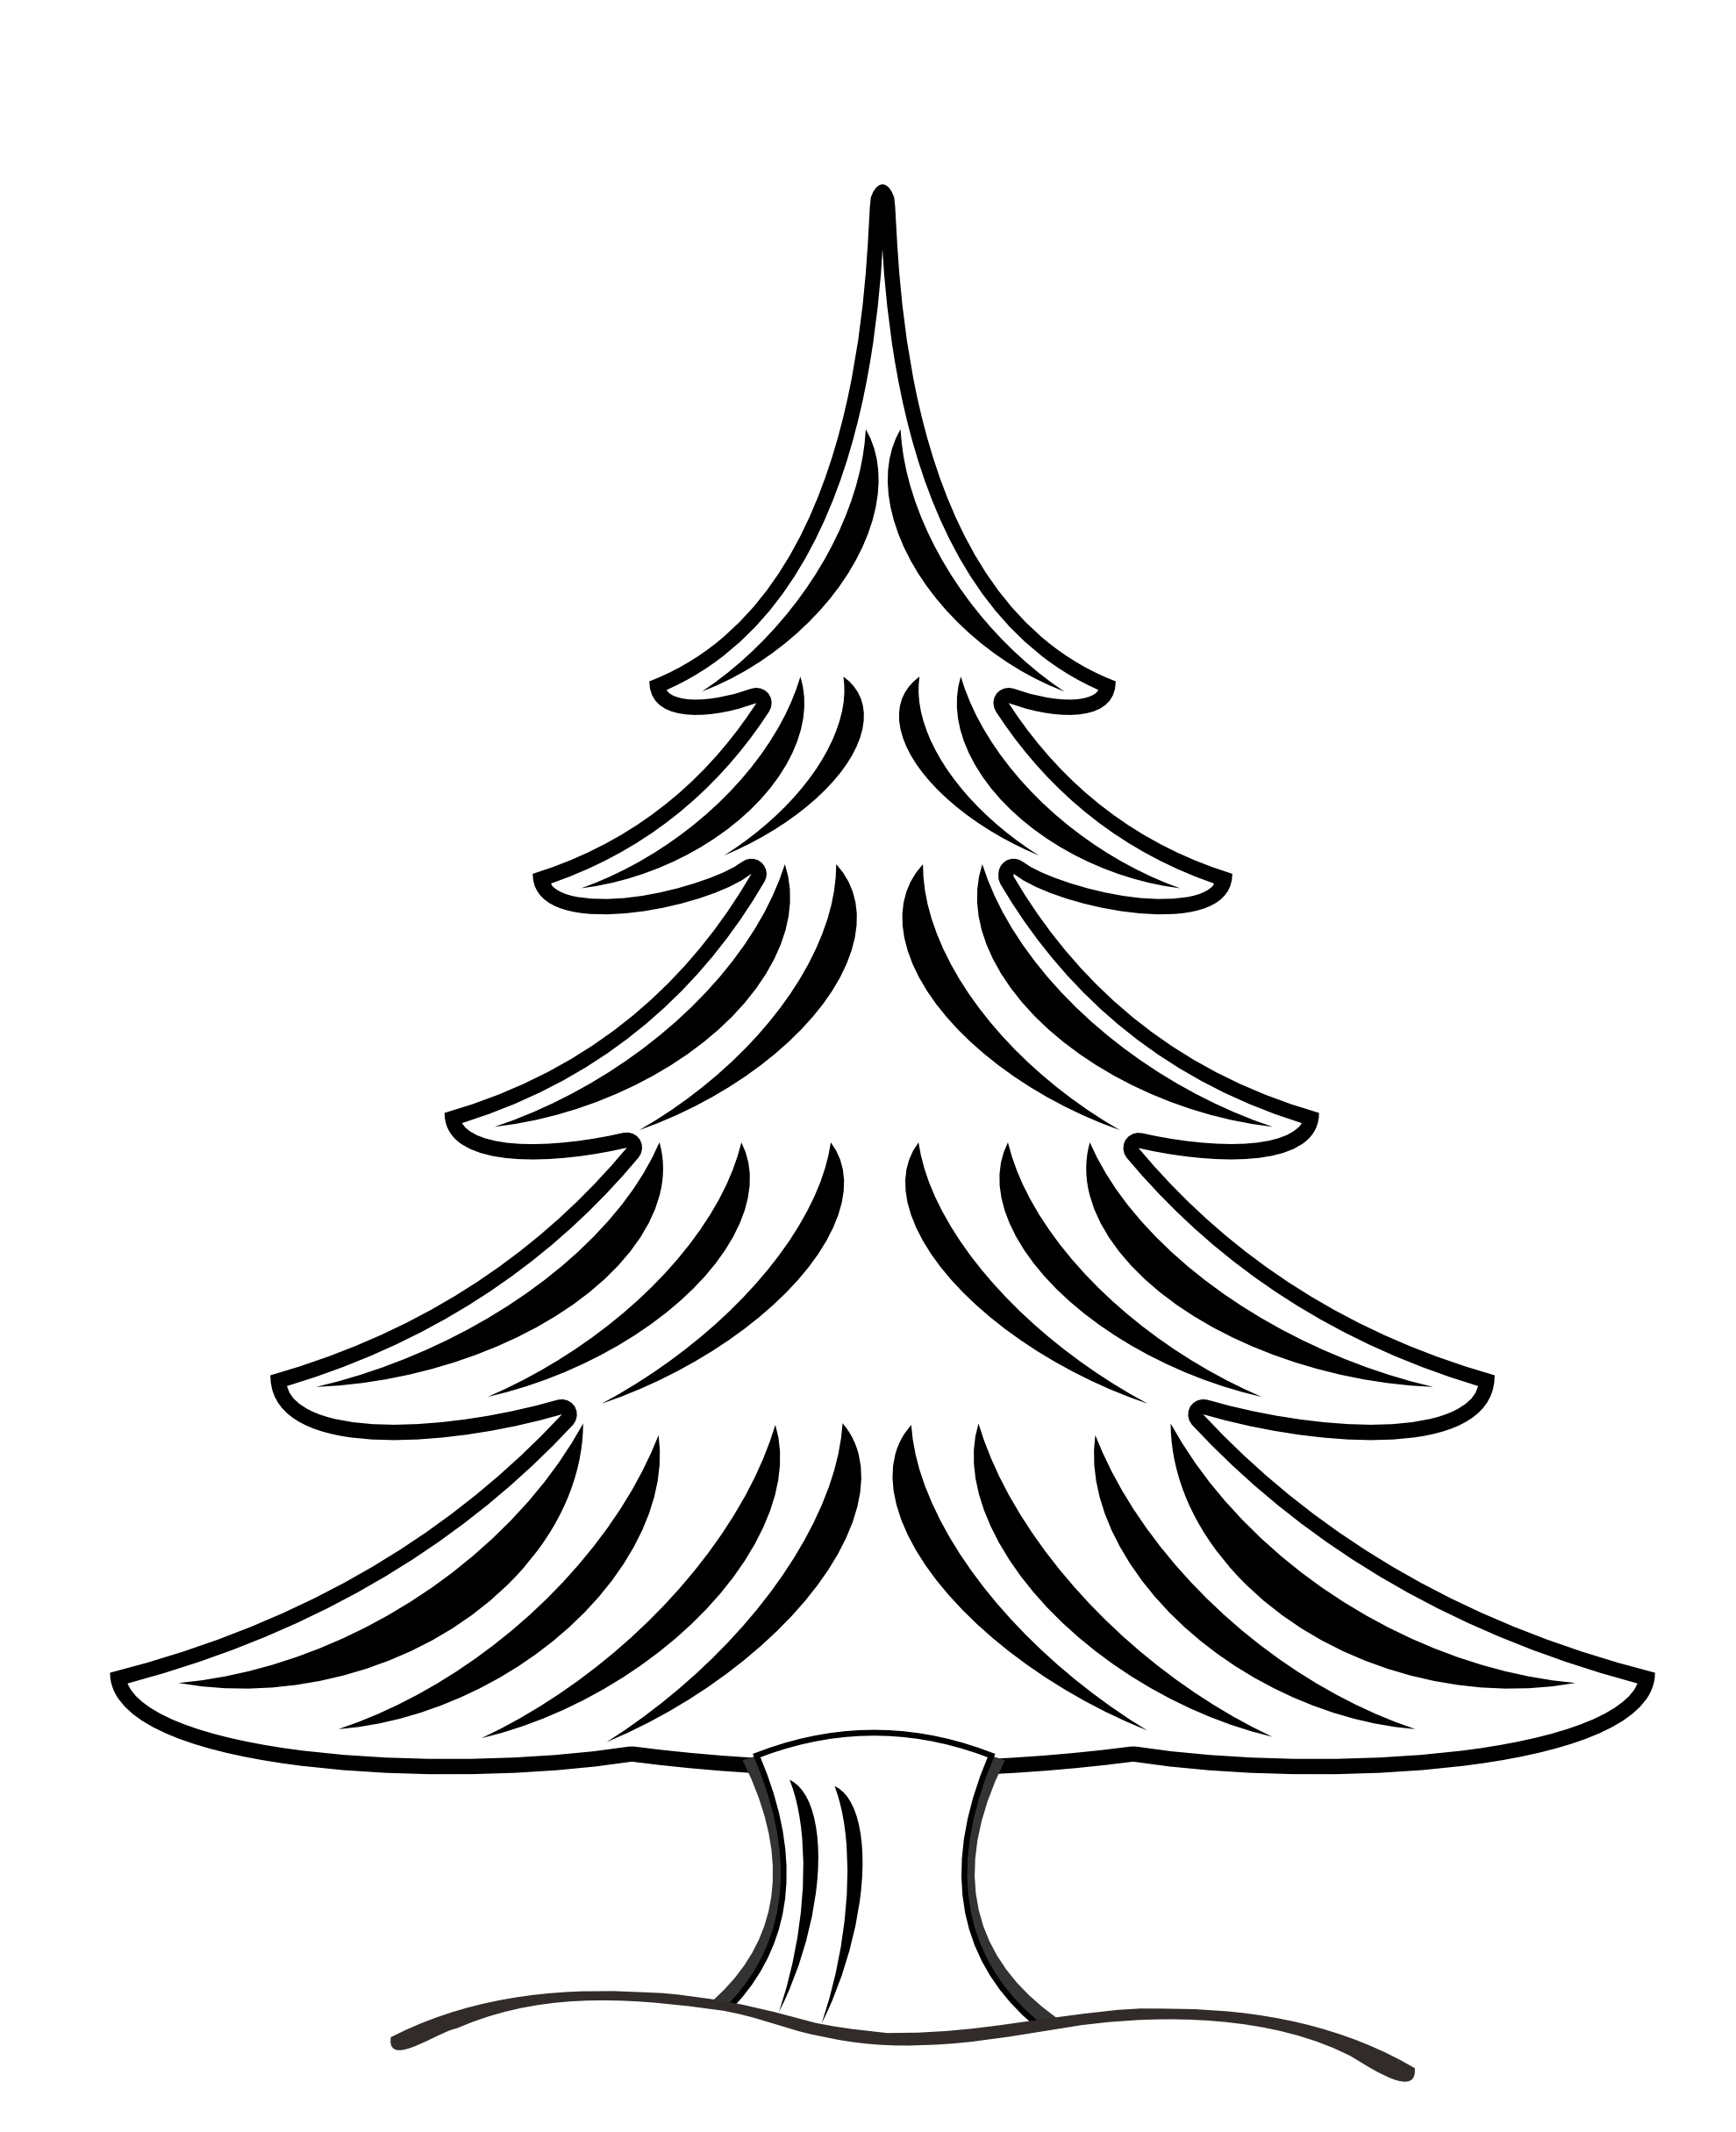 Line Art Tree Free Download Best Line Art Tree Clipartmag Ornaments To Print And Color 1979x2430 Christmas Tree Black White Line Art Clipart